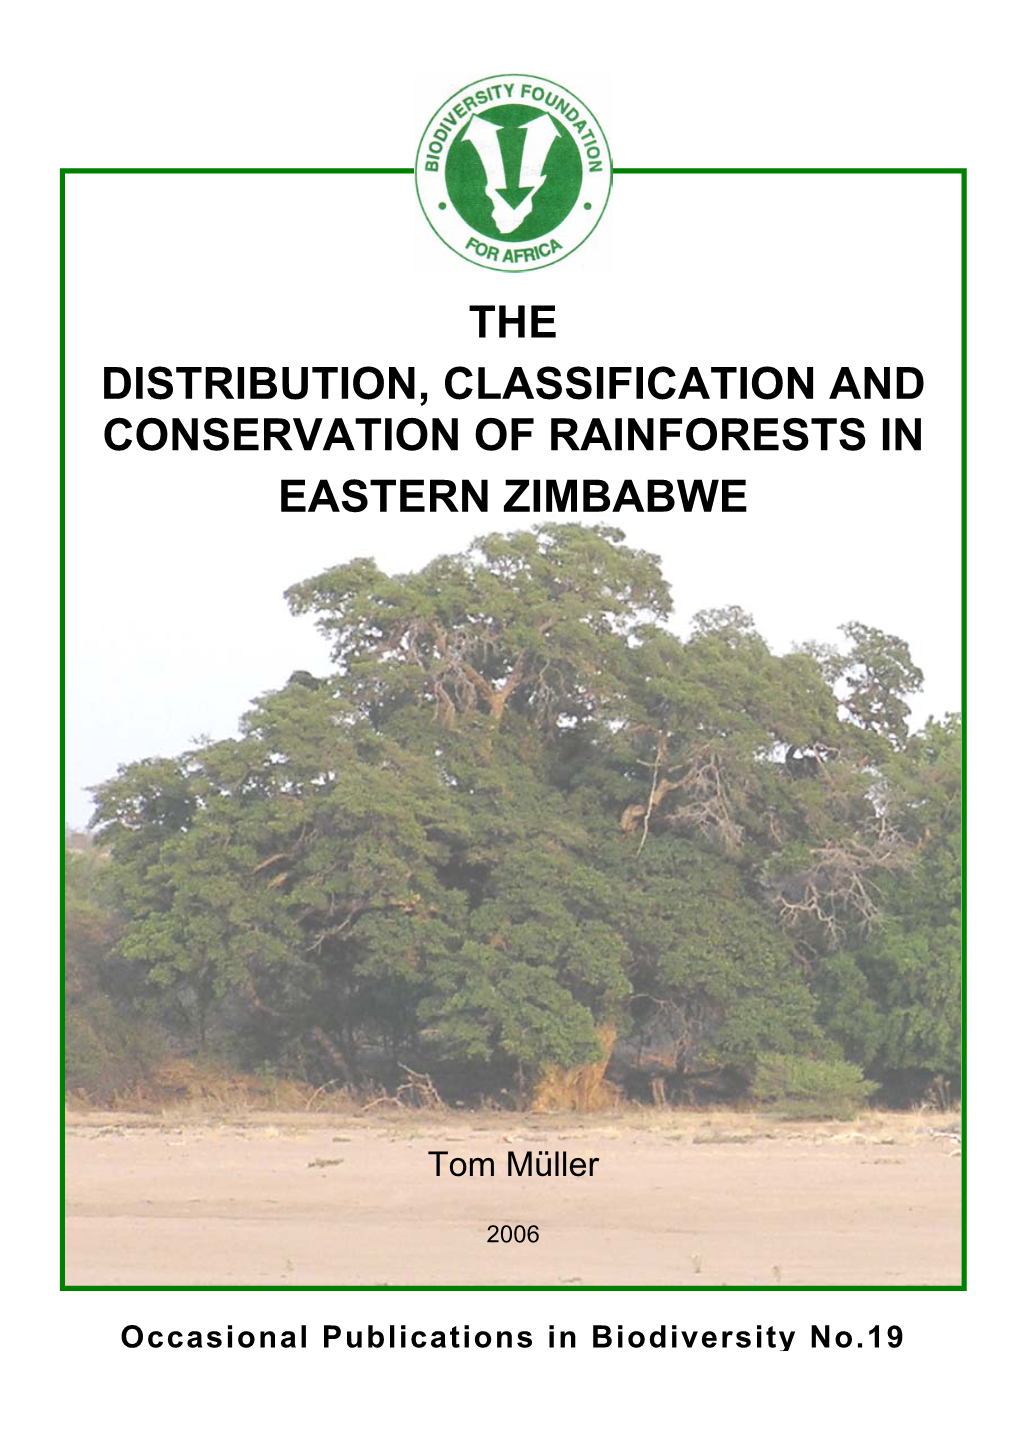 Distribution, Classification and Conservation of Rainforests in Eastern Zimbabwe